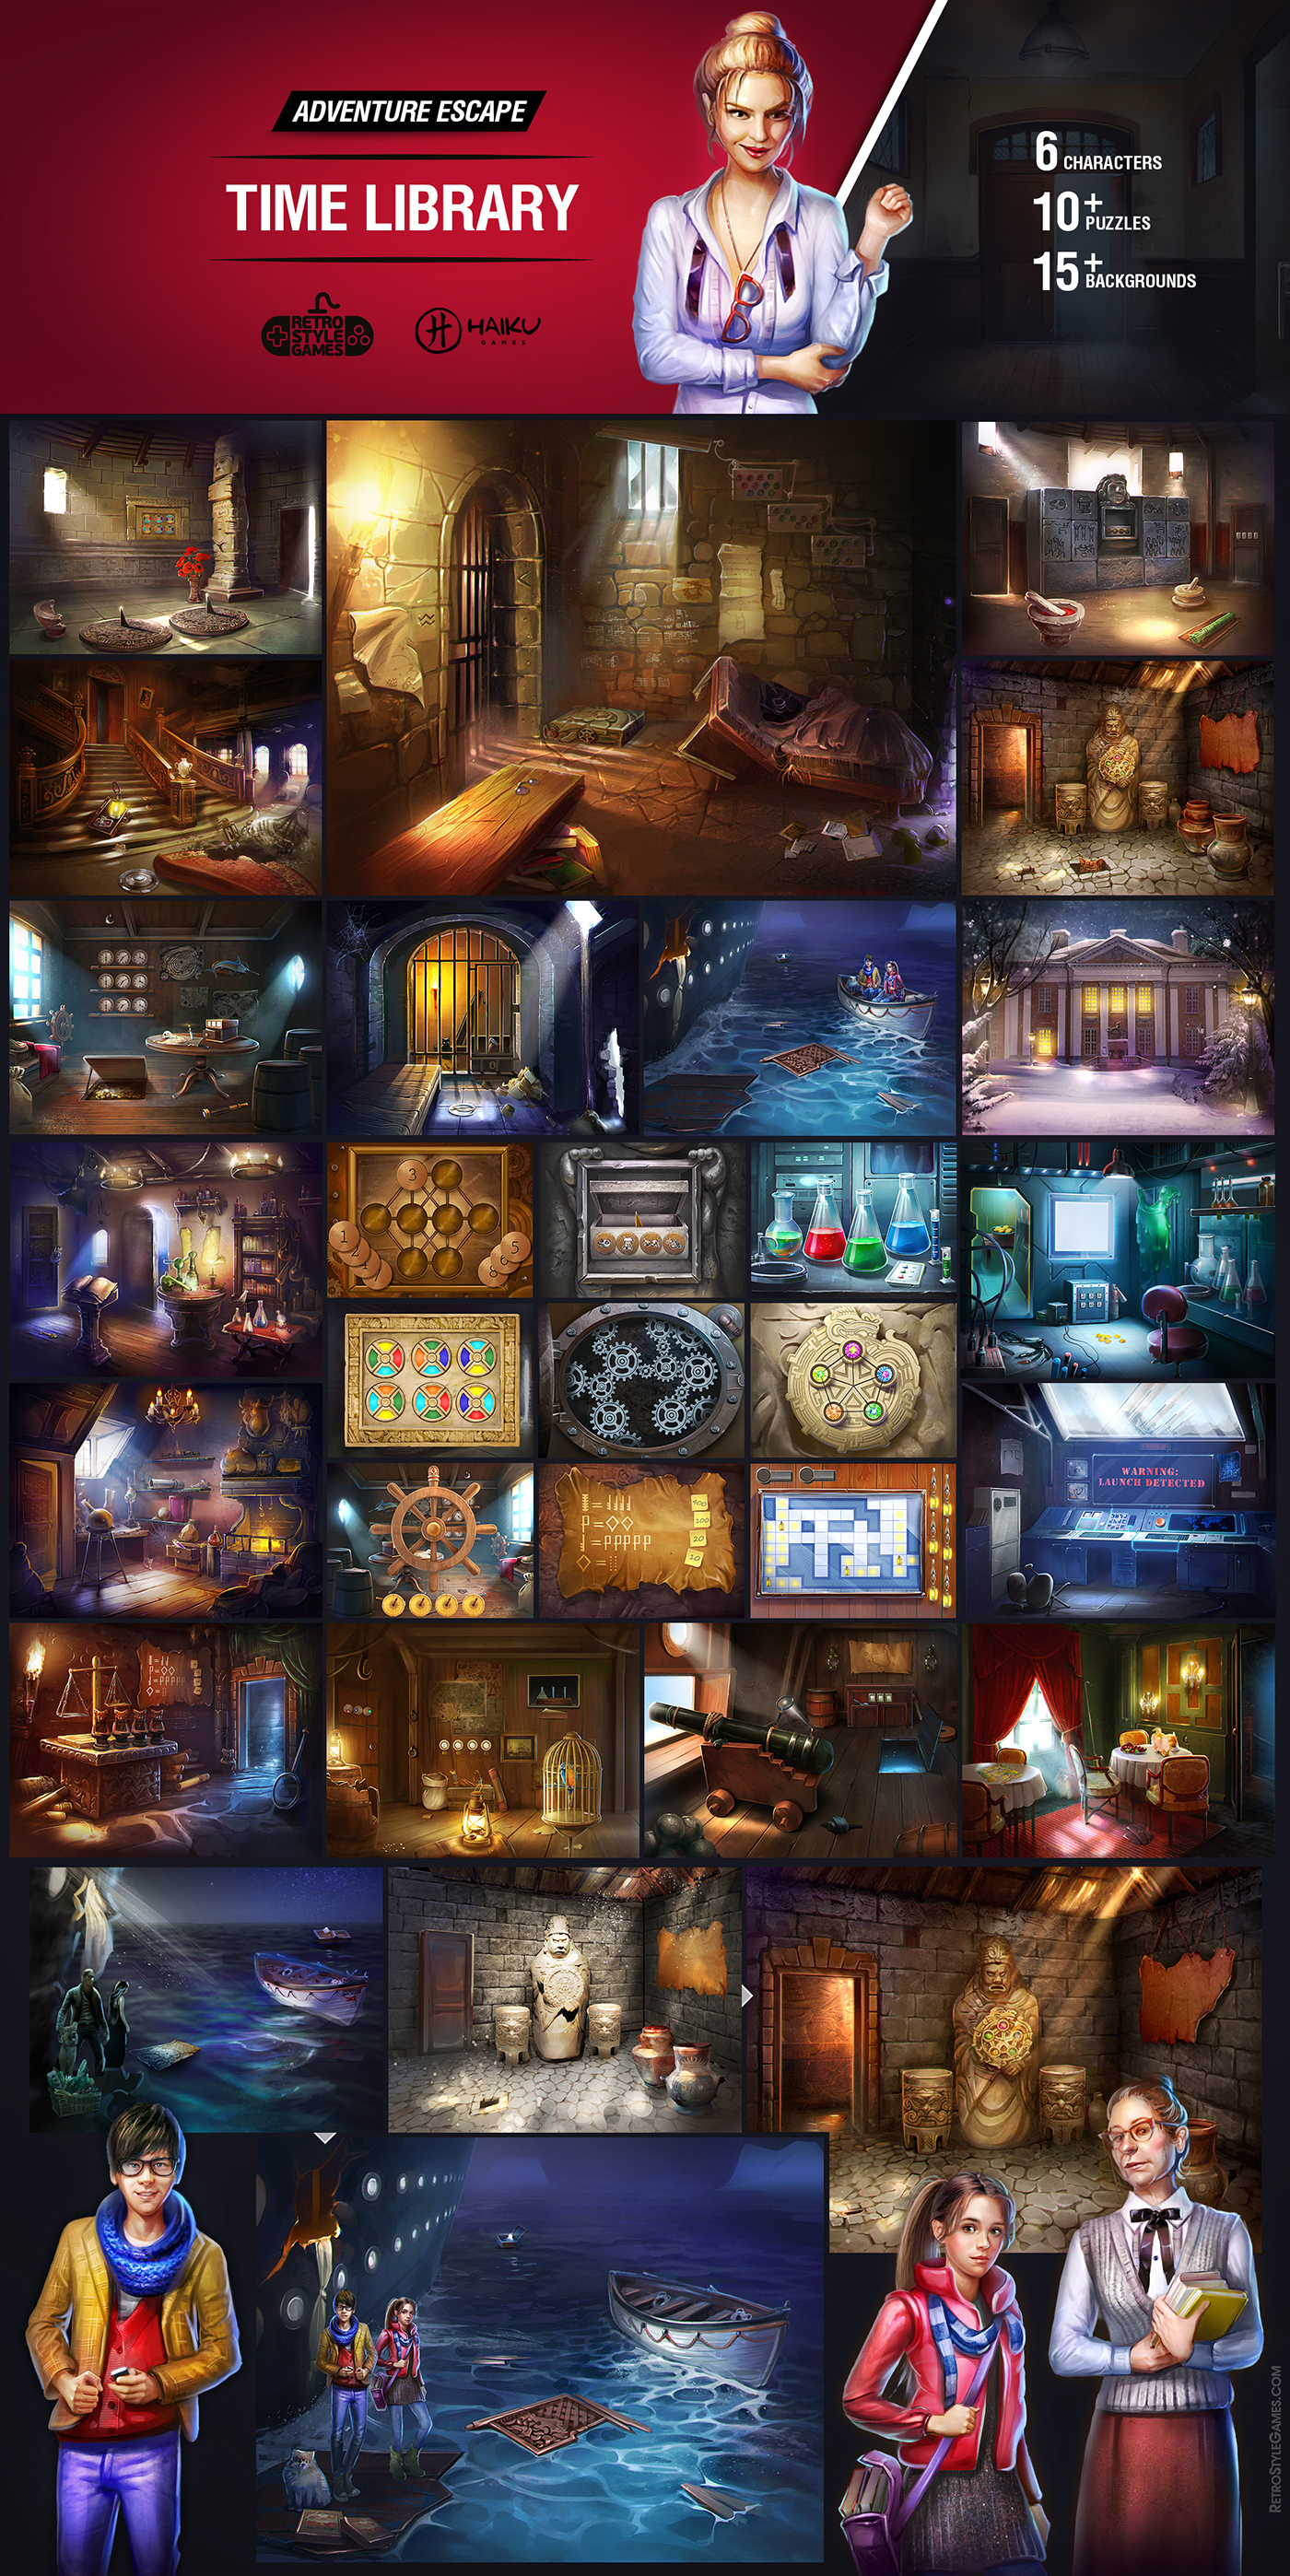 quest adventure escape HOG hidden object inventory characters mobile room